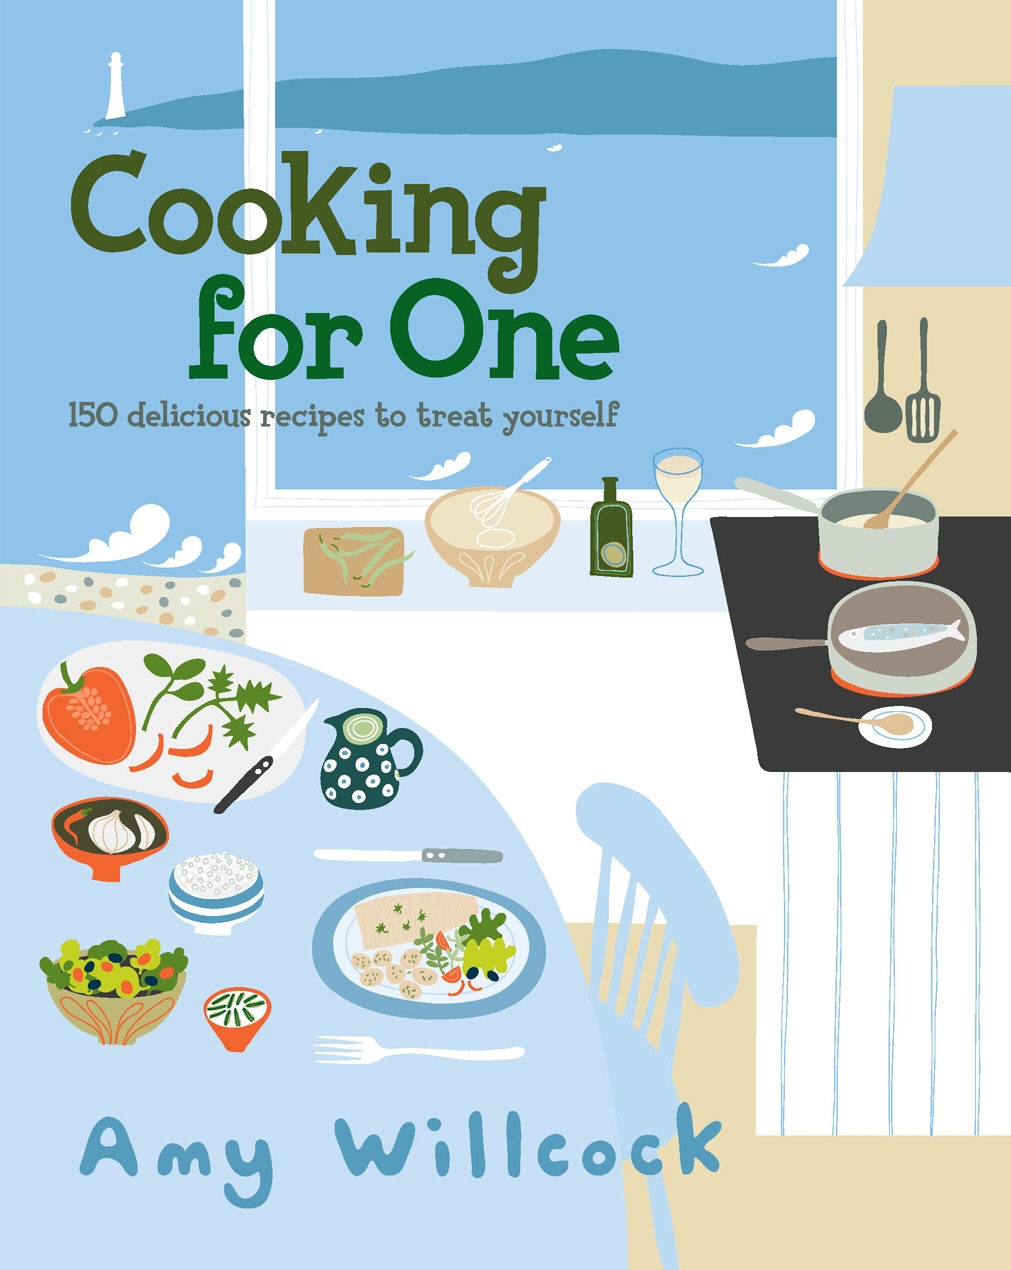 Cooking for One by Amy Willcock - Penguin Books Australia